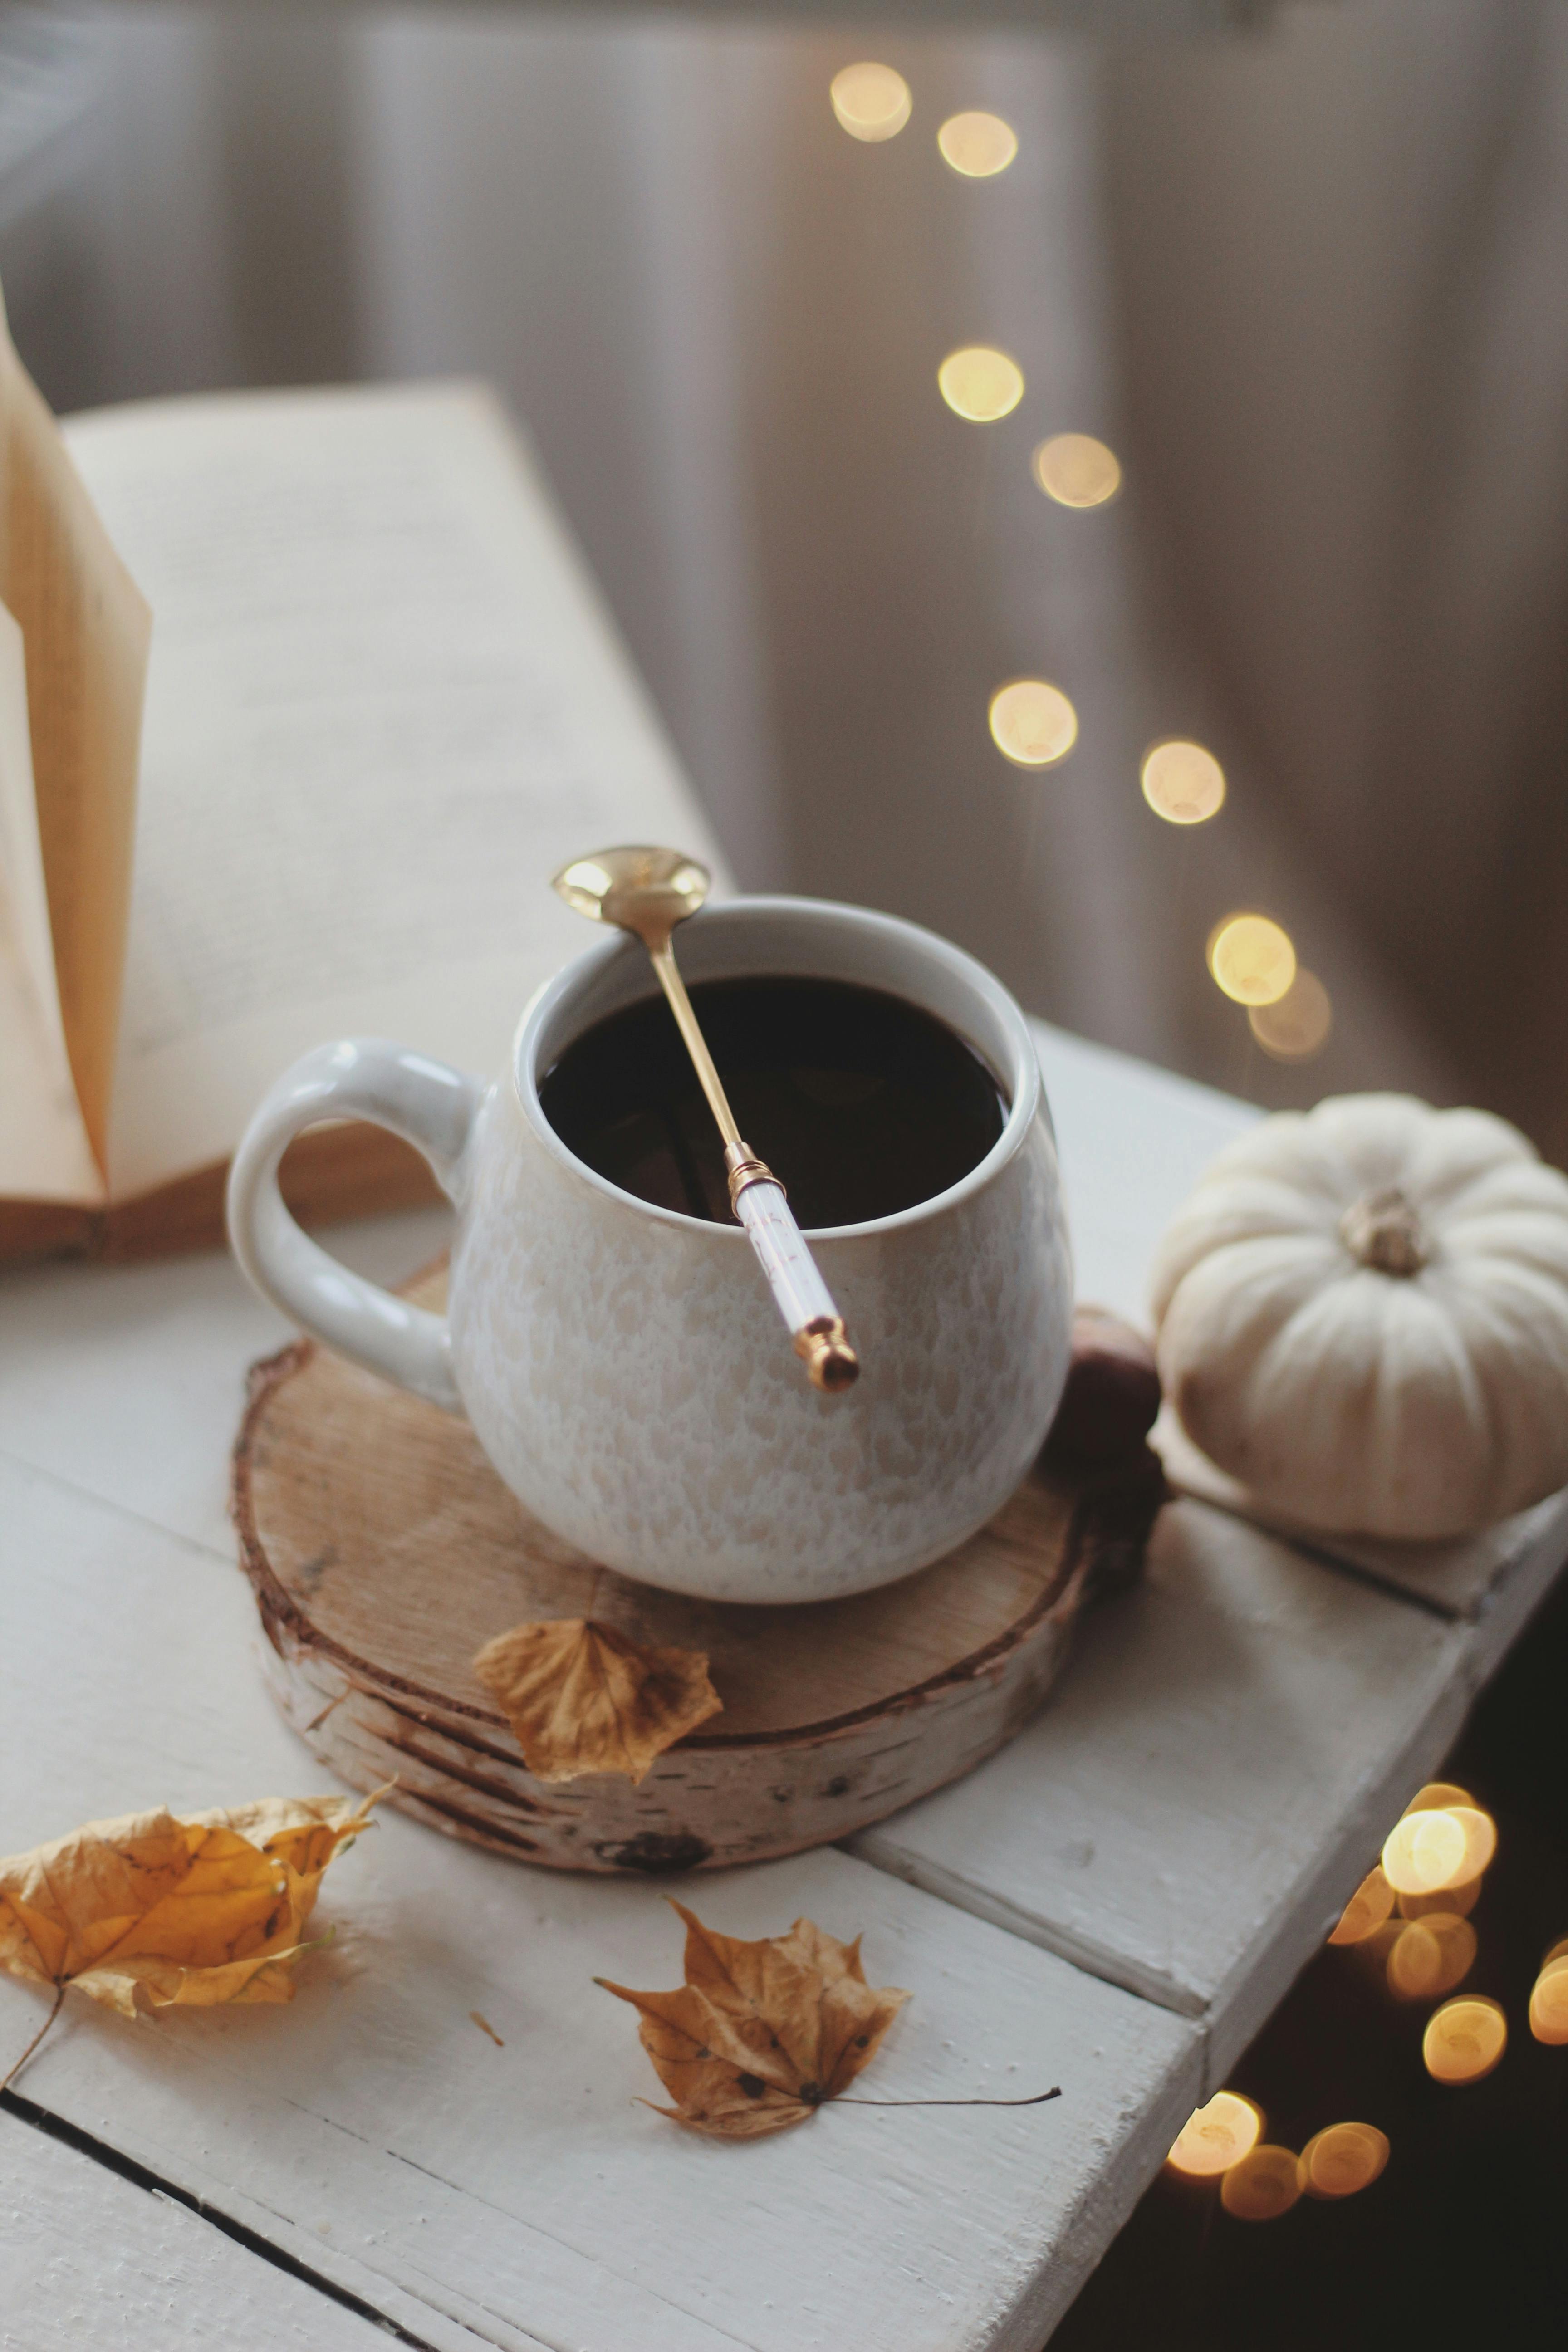 Coffee in Cup in Cozy Decoration · Free Stock Photo